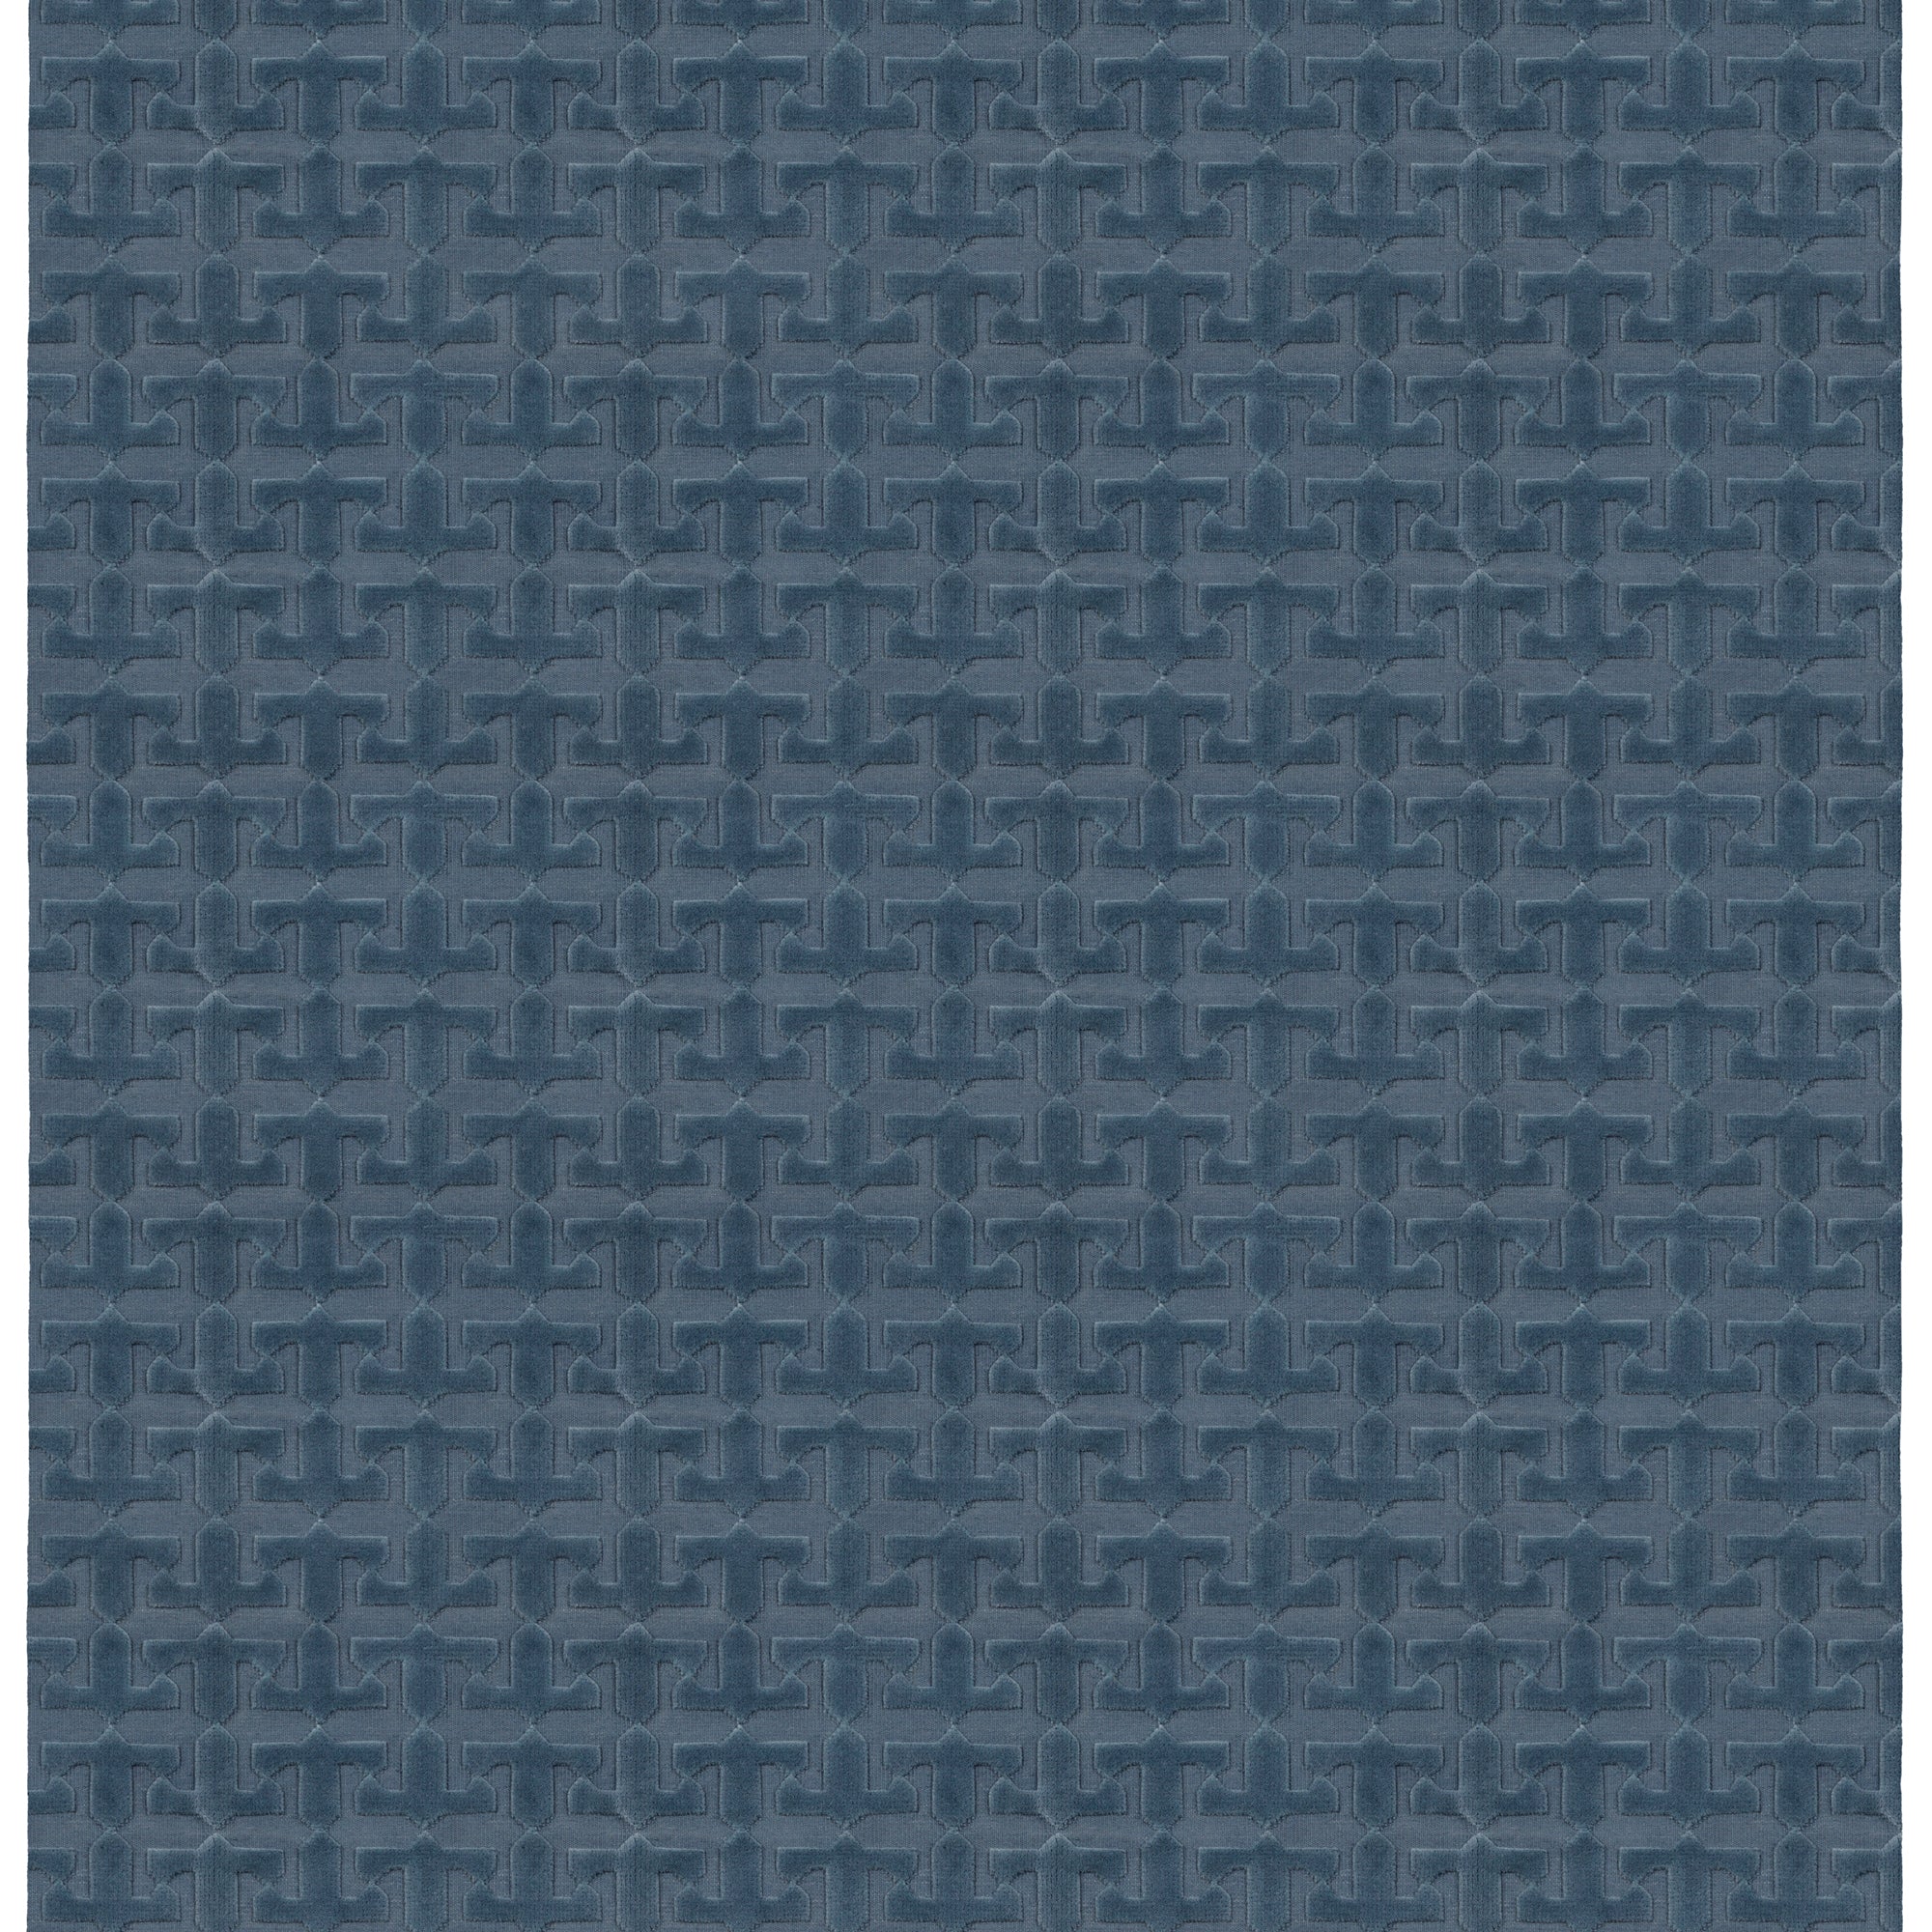 Full size Iseo Rug in Stormy Sky, a textural monochromatic abstract geometric pattern in blue. 